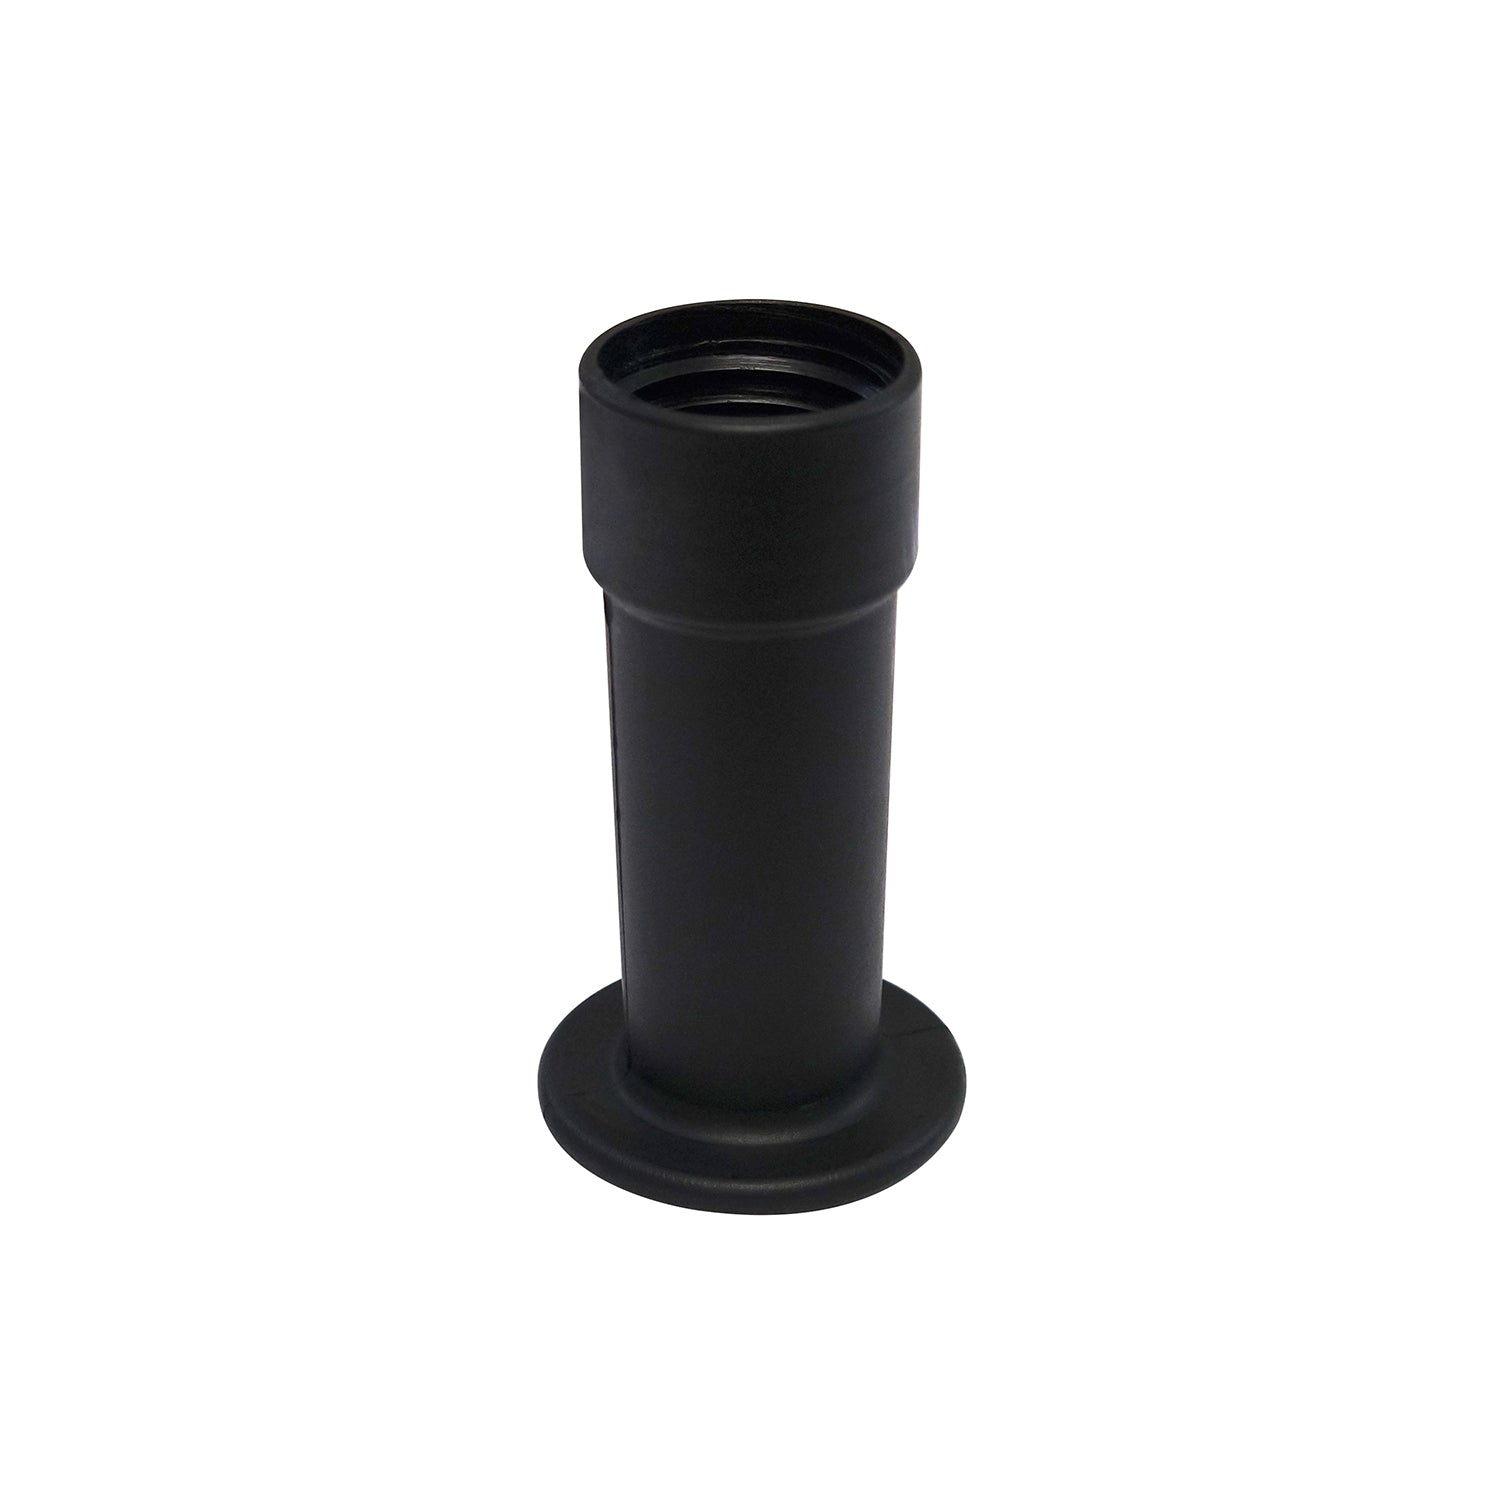 SECO Topo-Boot for Prism Pole -Rods, Poles & Accessories- eGPS Solutions Inc.